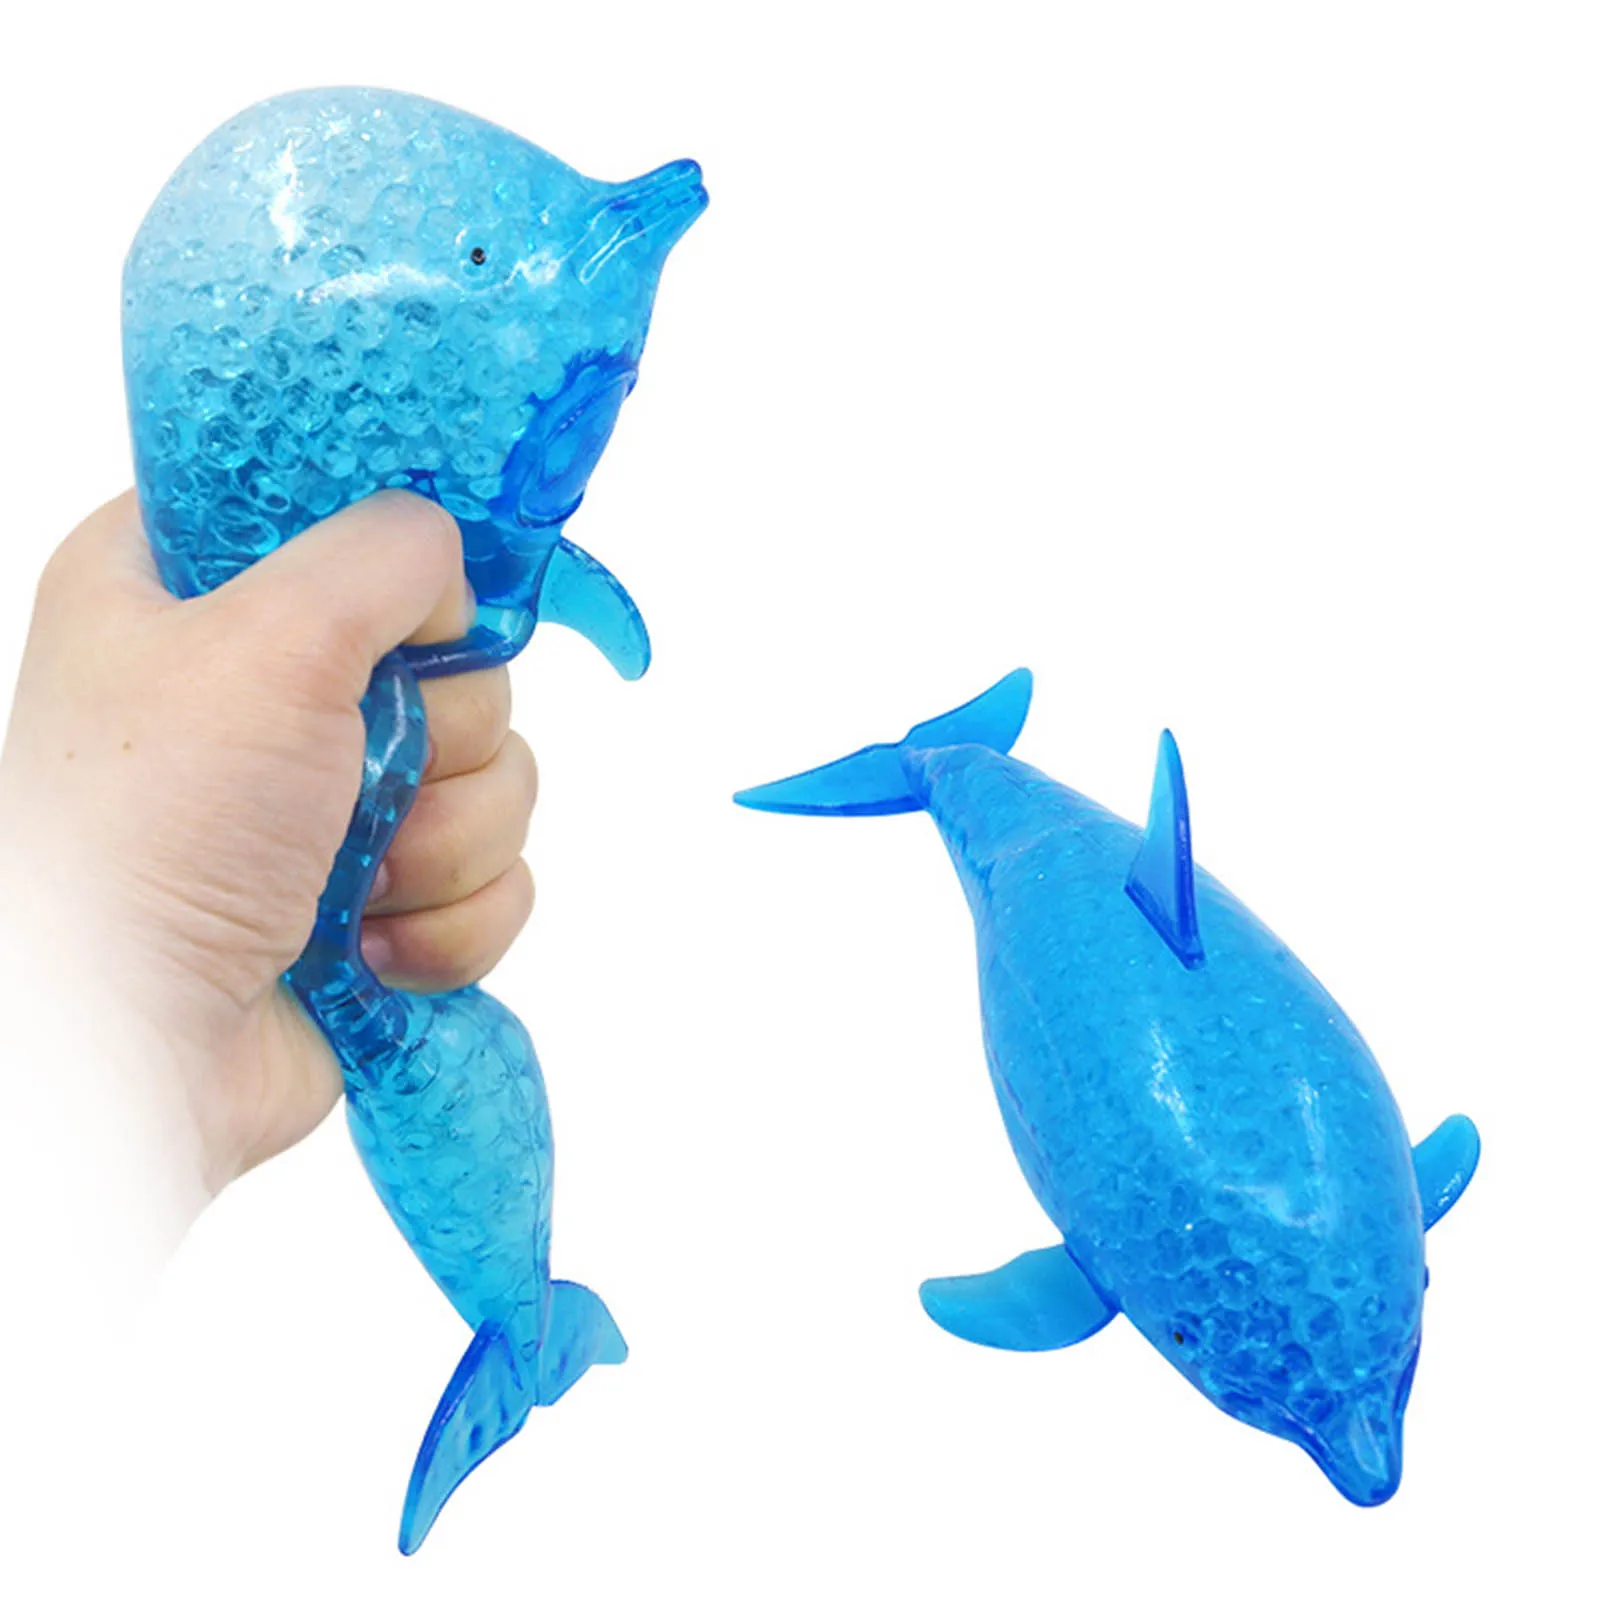 19cm Spongy Dolphin Squeeze Toys Soild Color Blue Squeezable Bead Stress Ball Toy For Adult Needs Stress Reliever Sensory Toys